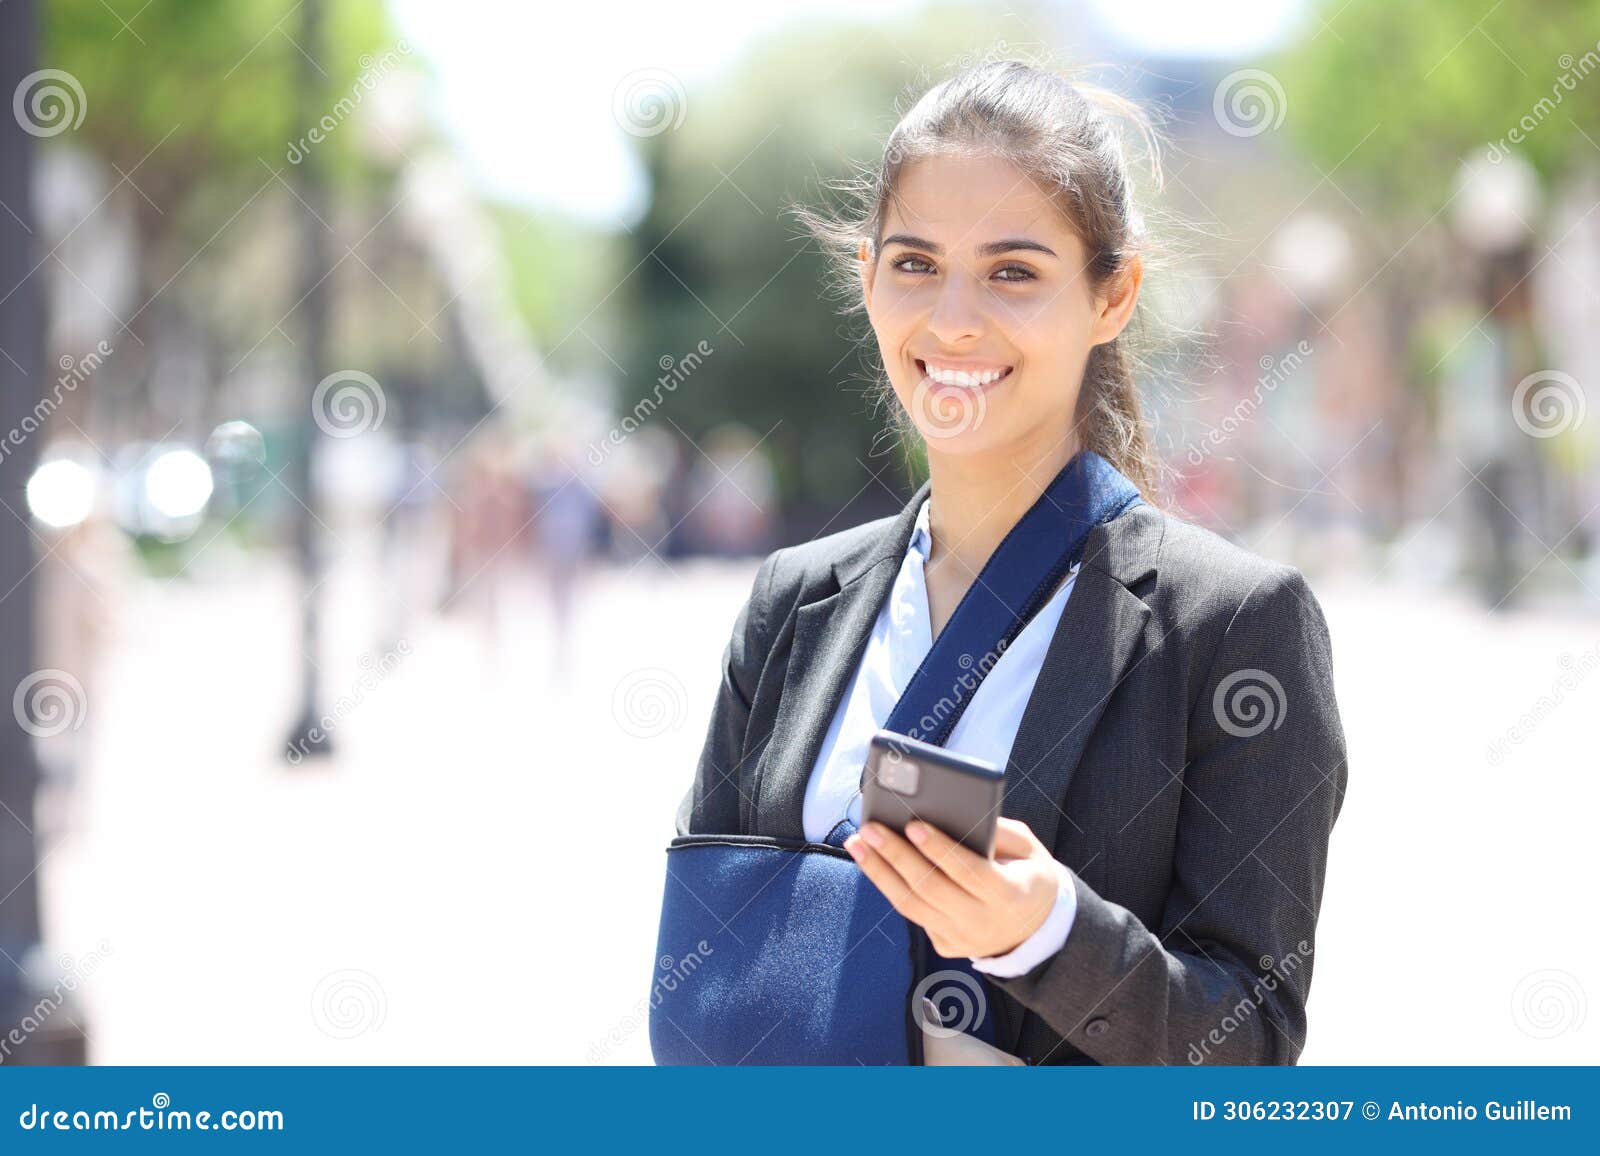 happy convalescent businesswoman holding phone looks at you